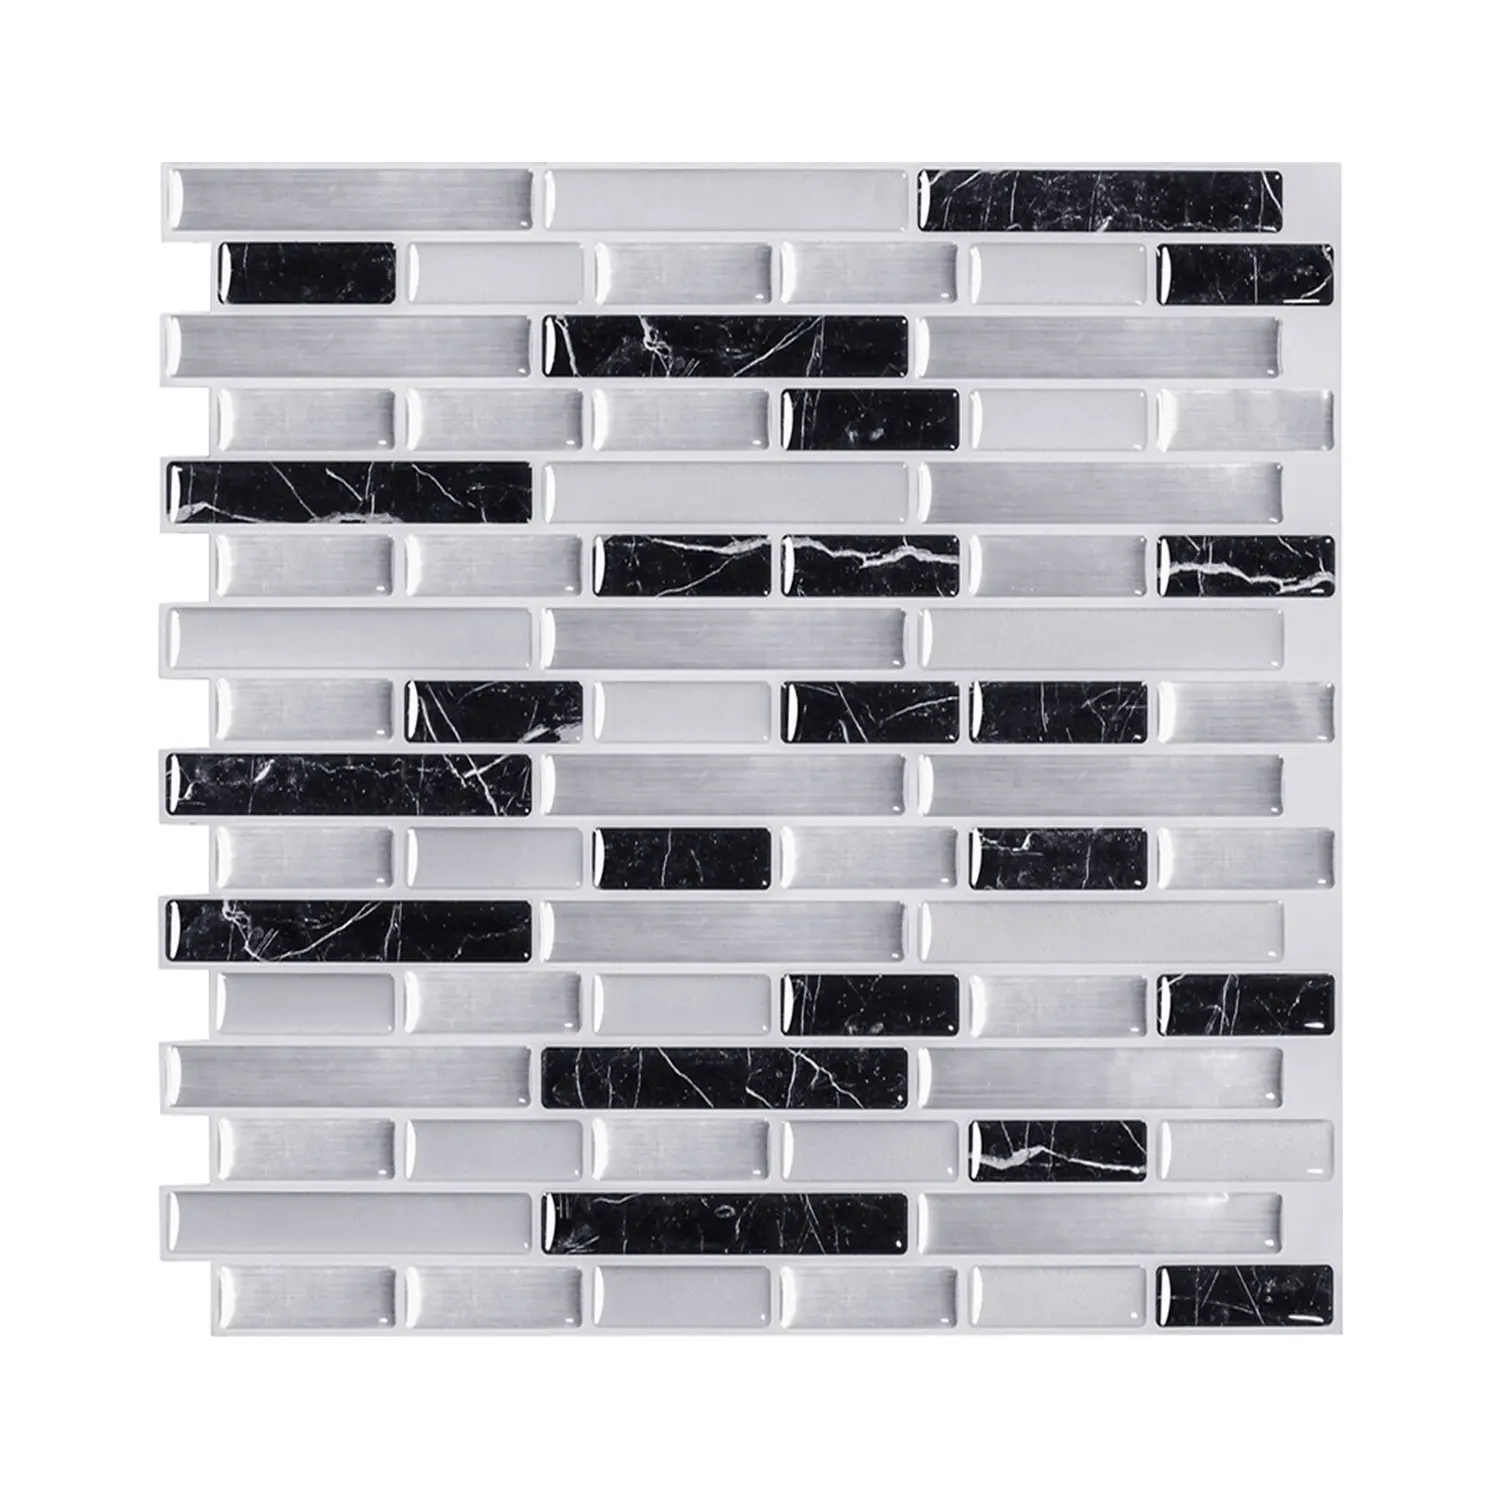 Peel and stick 3d vinyl tile sticker modern home decoration wall coverings marble mosaic wallpaper for backsplash decoration